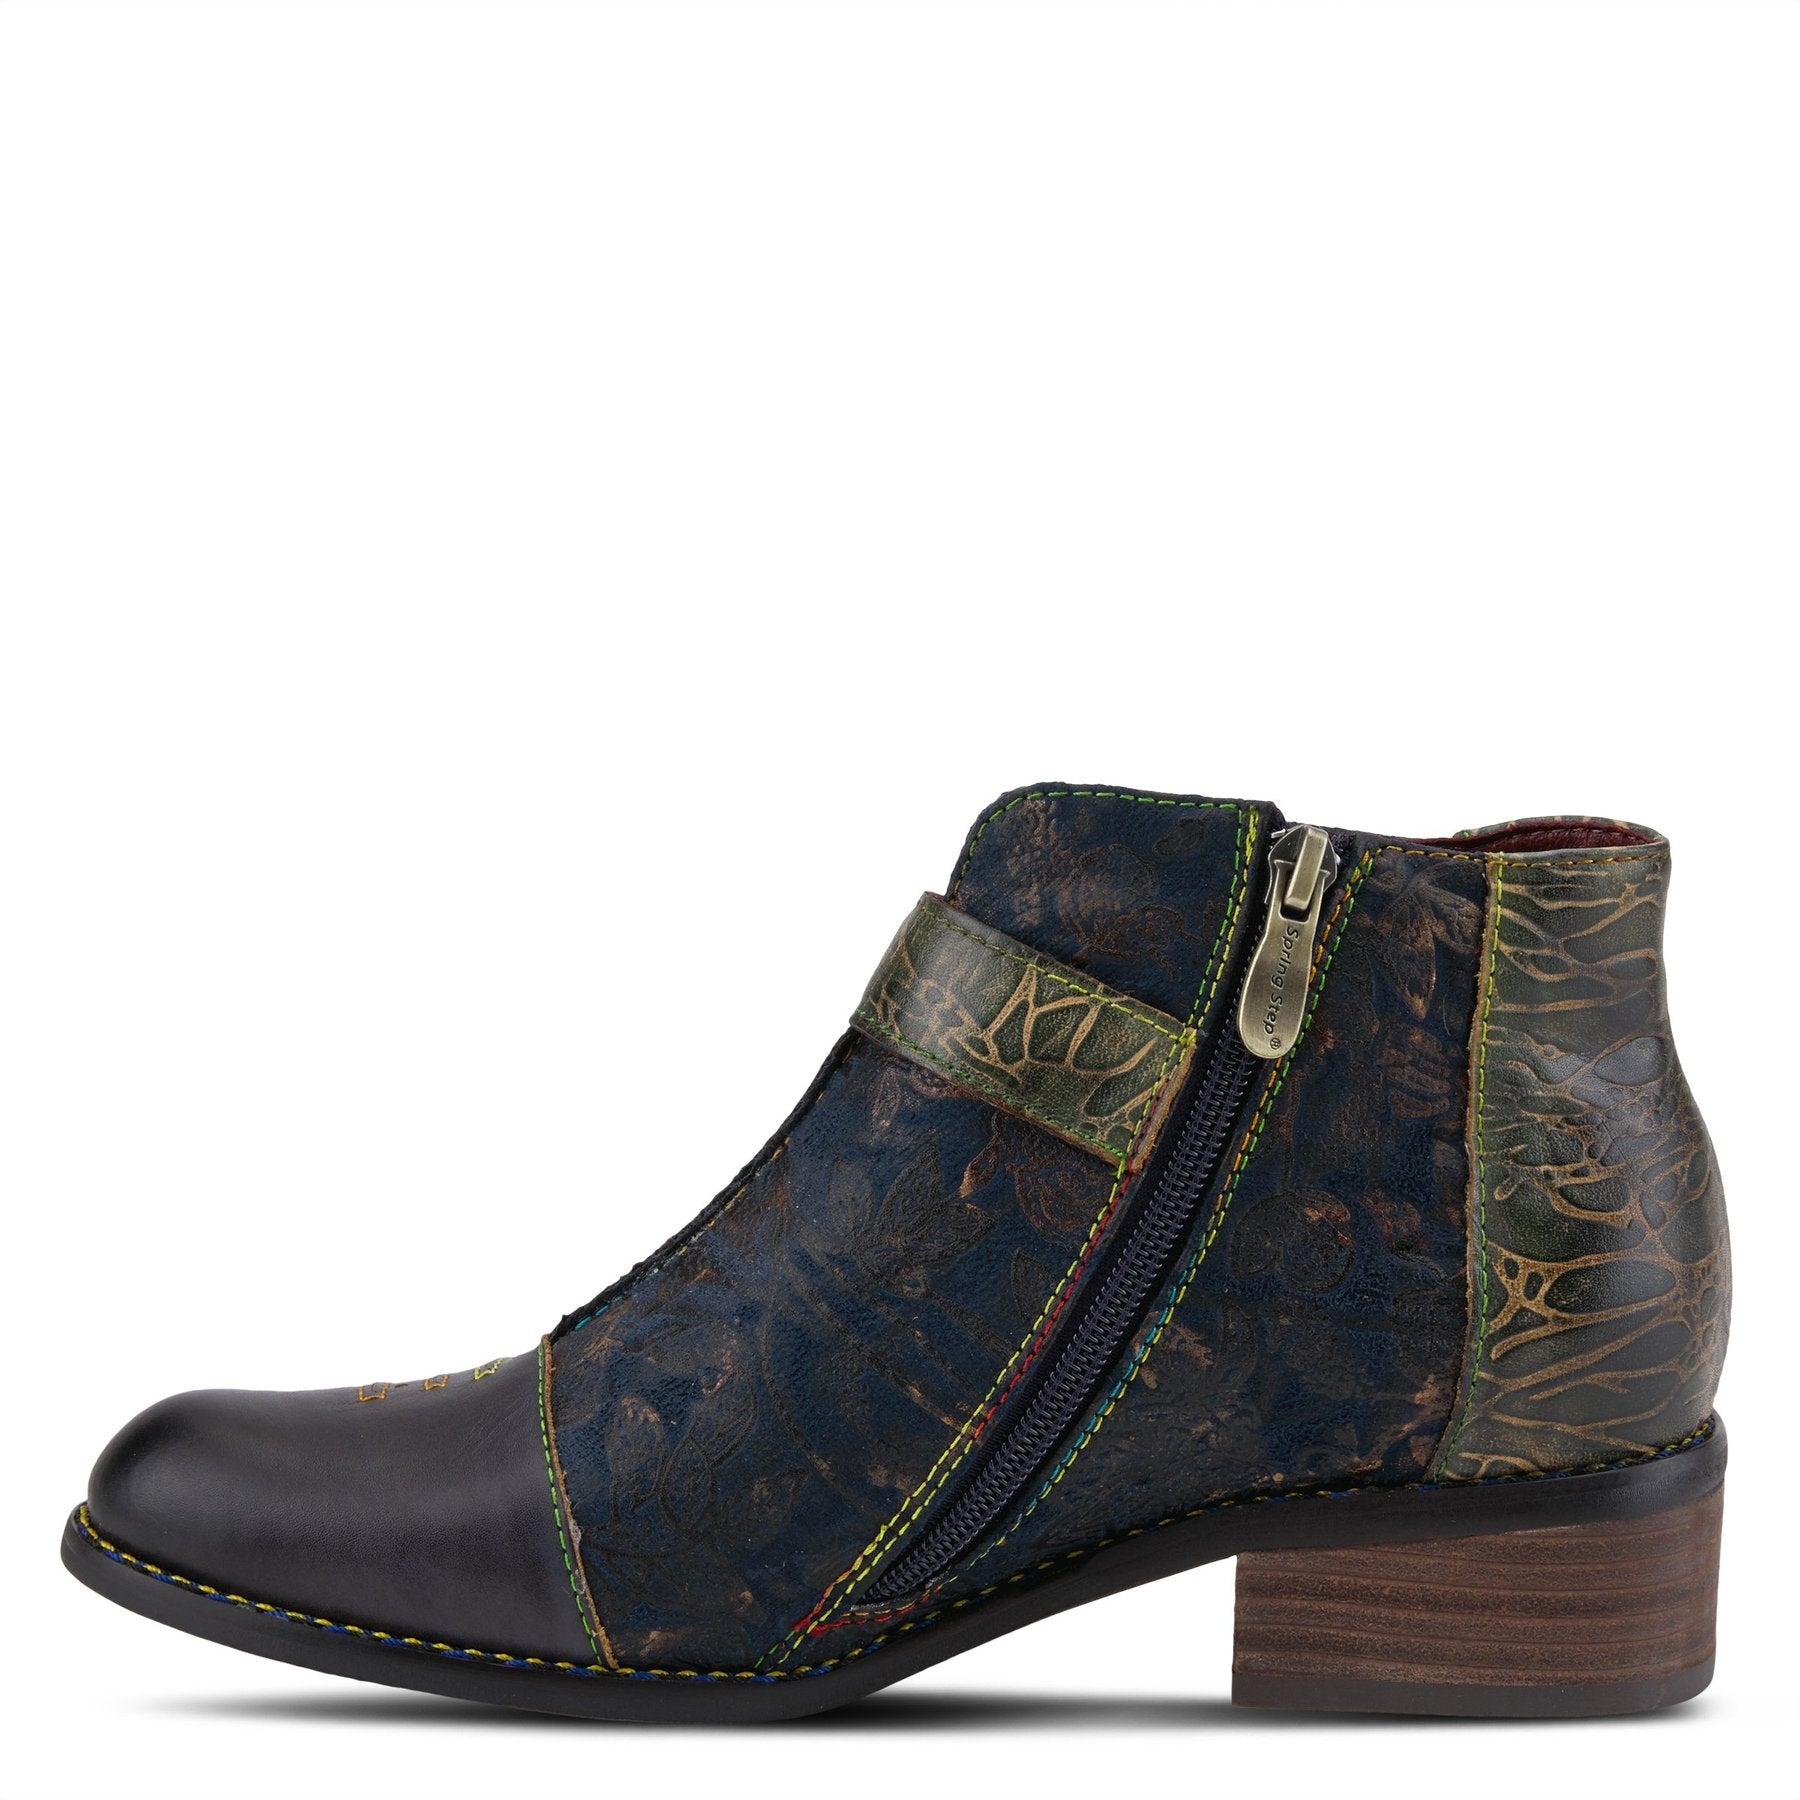 Inner side view of the l'artiste georgiana boot. This boot is blue multi with a subtle gold floral print and an inner zipper.